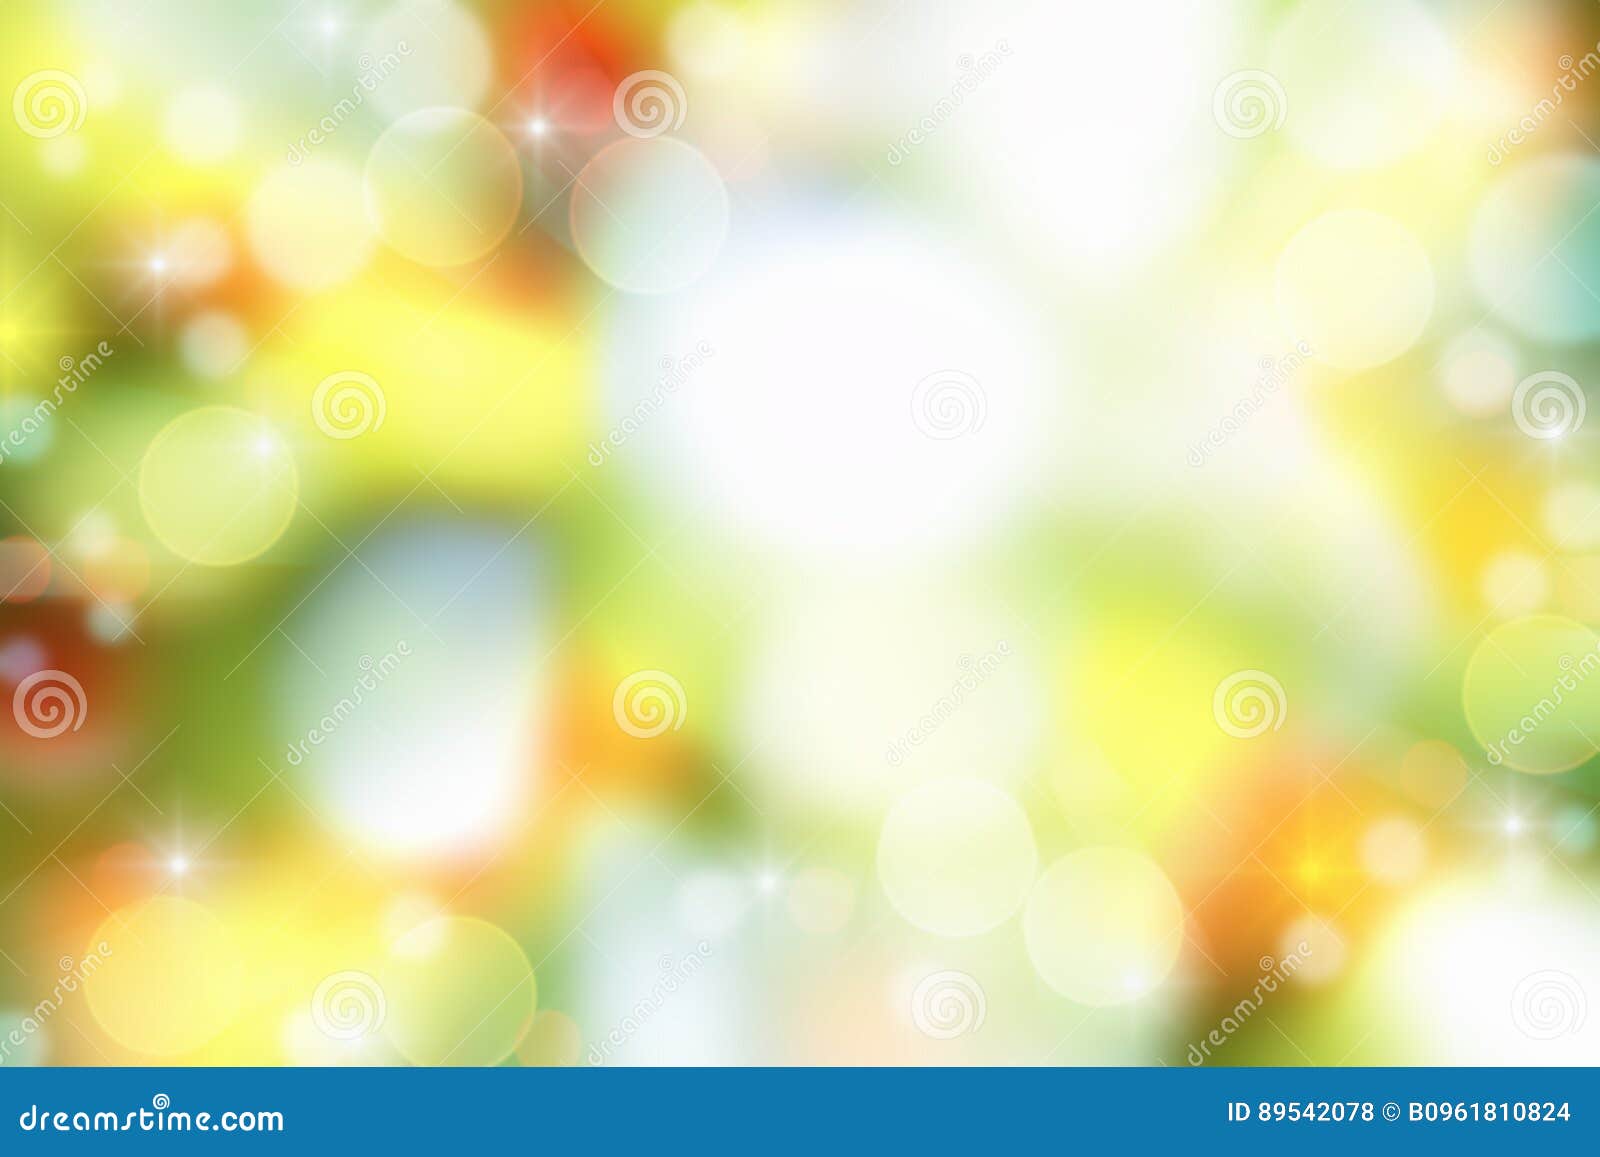 Abstract Blurred Background in Light Pleasant Tones. Shine and B Stock  Photo - Image of defocused, abstract: 89542078